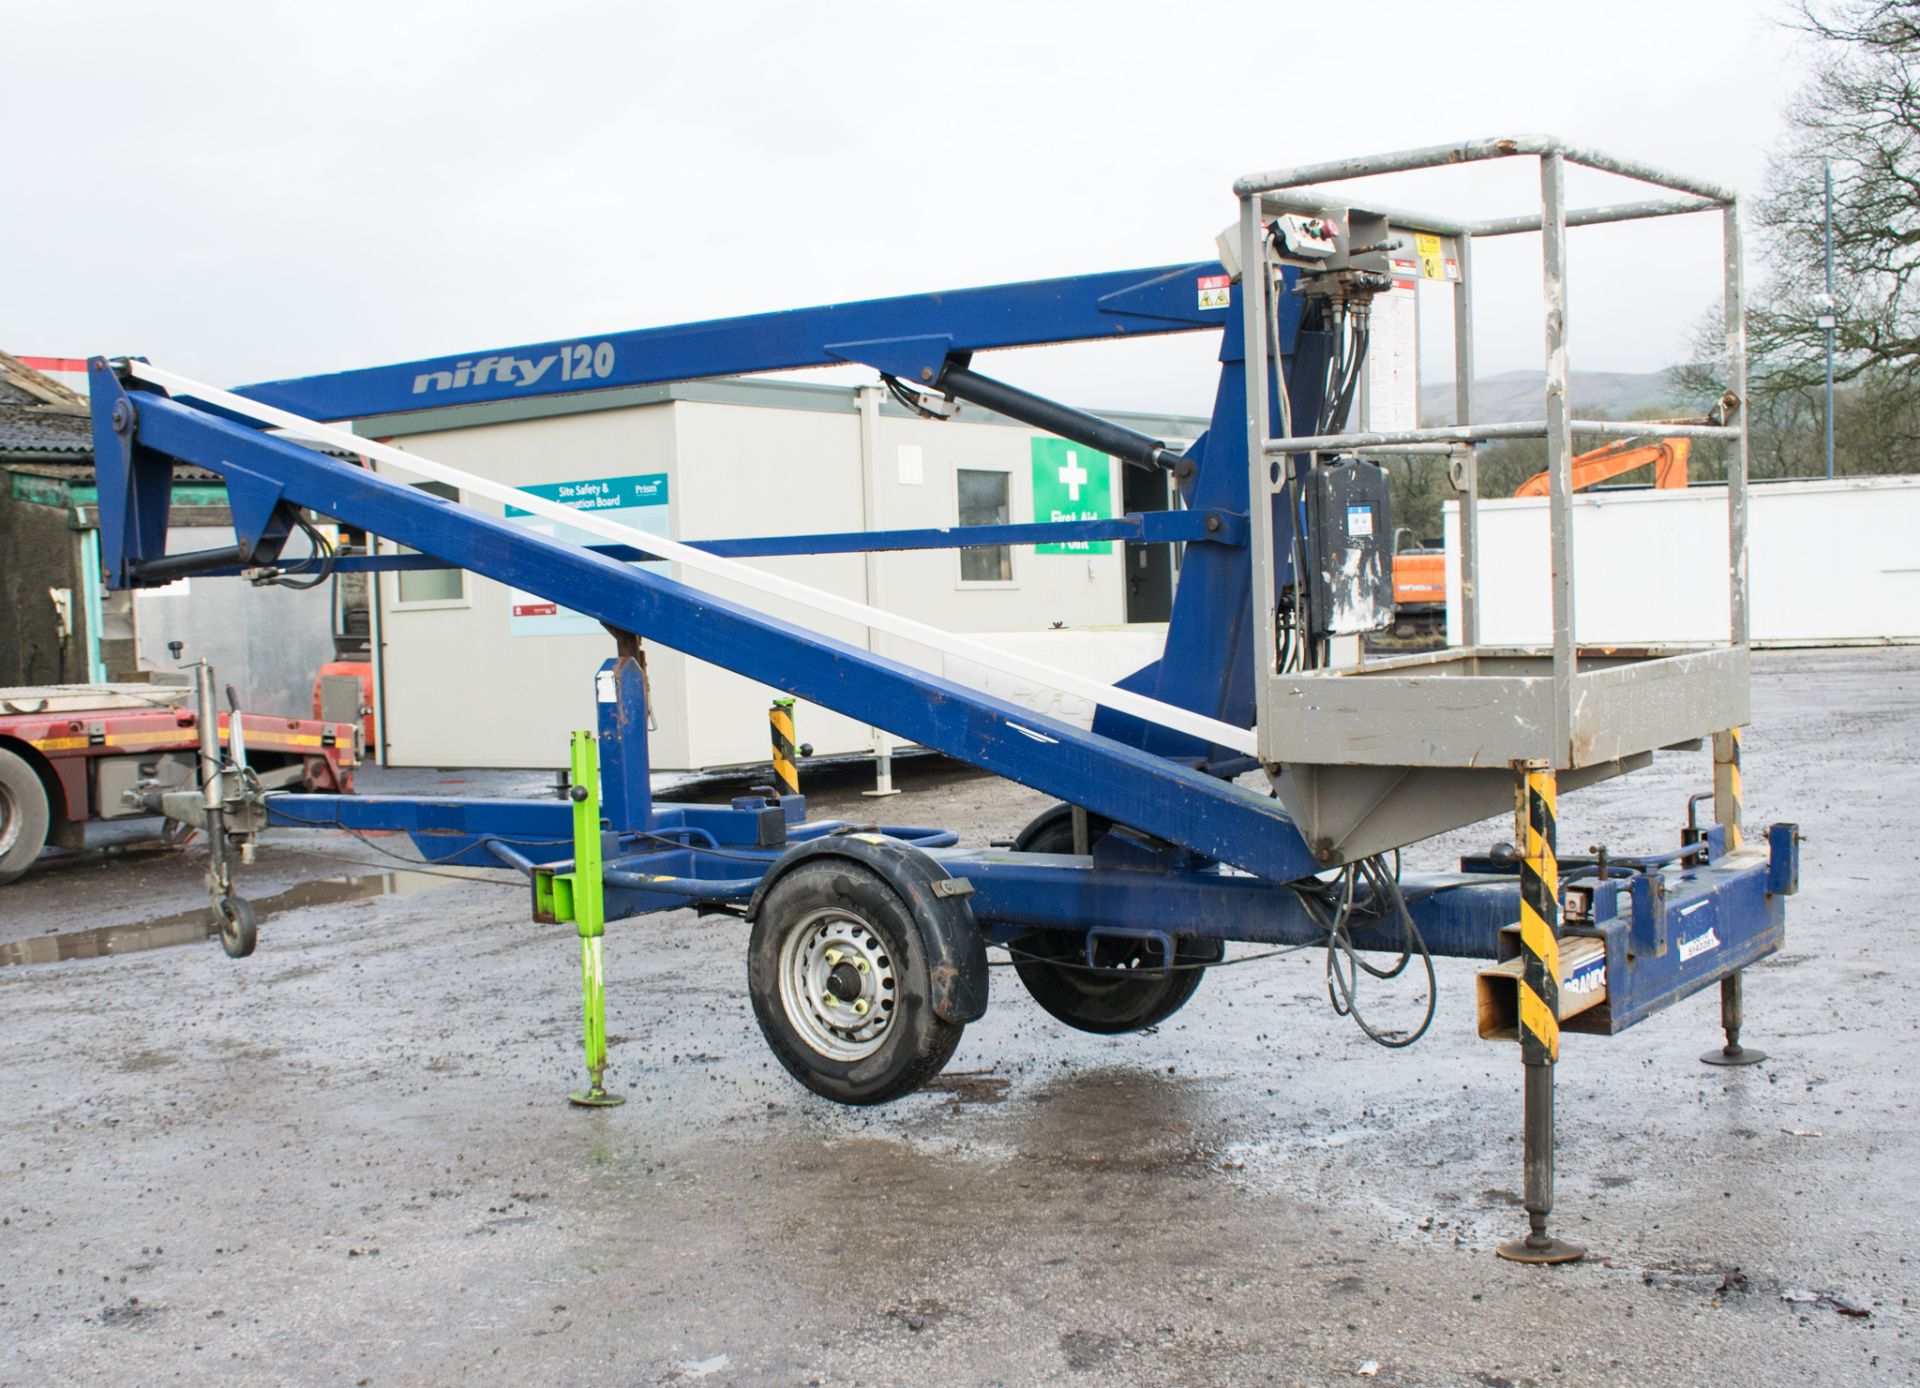 Nifty 120 ME fast tow articulated boom lift access platform Year: 2006 S/N: 015149 08660045 - Image 3 of 9